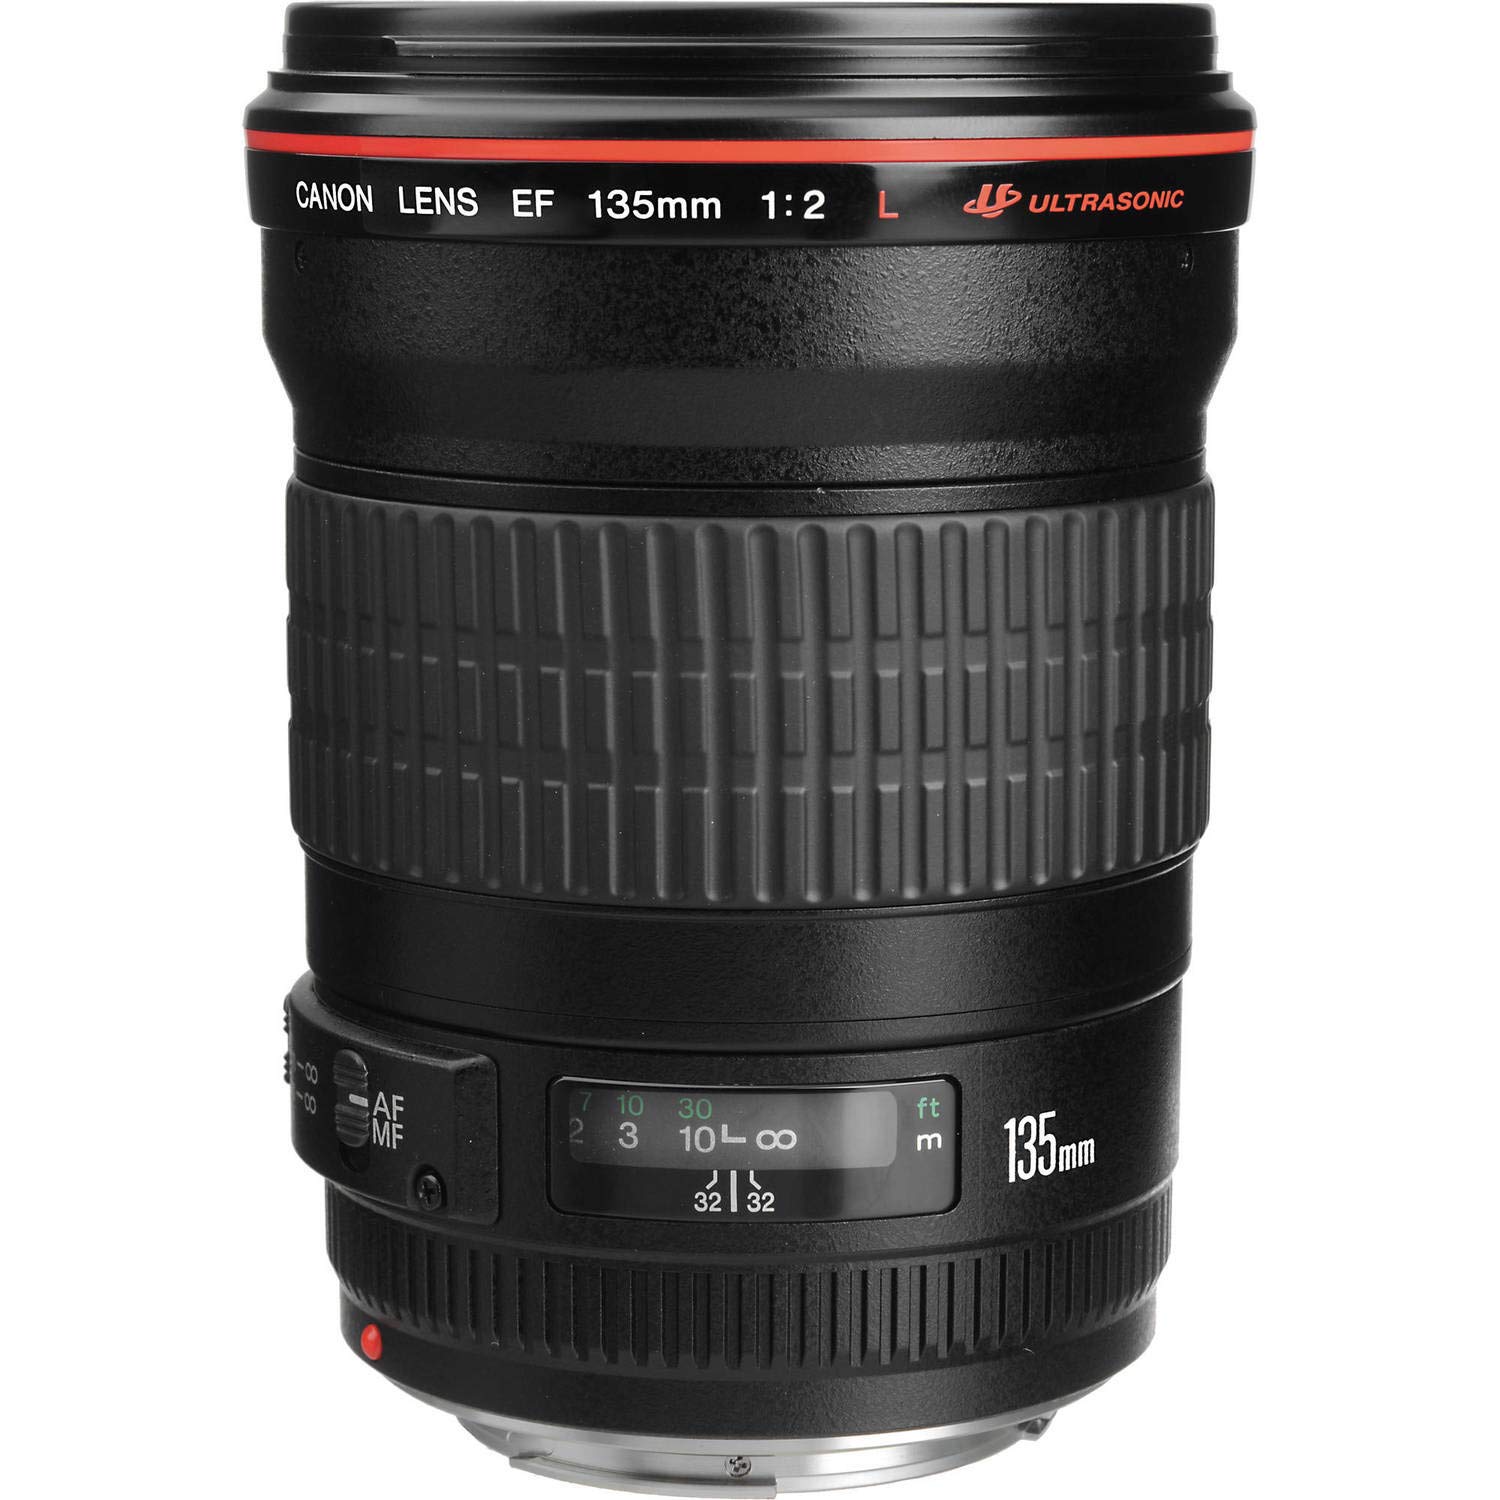 Canon EF 135mm f/2L USM Lens (Intl Model) with Cleaning Kit